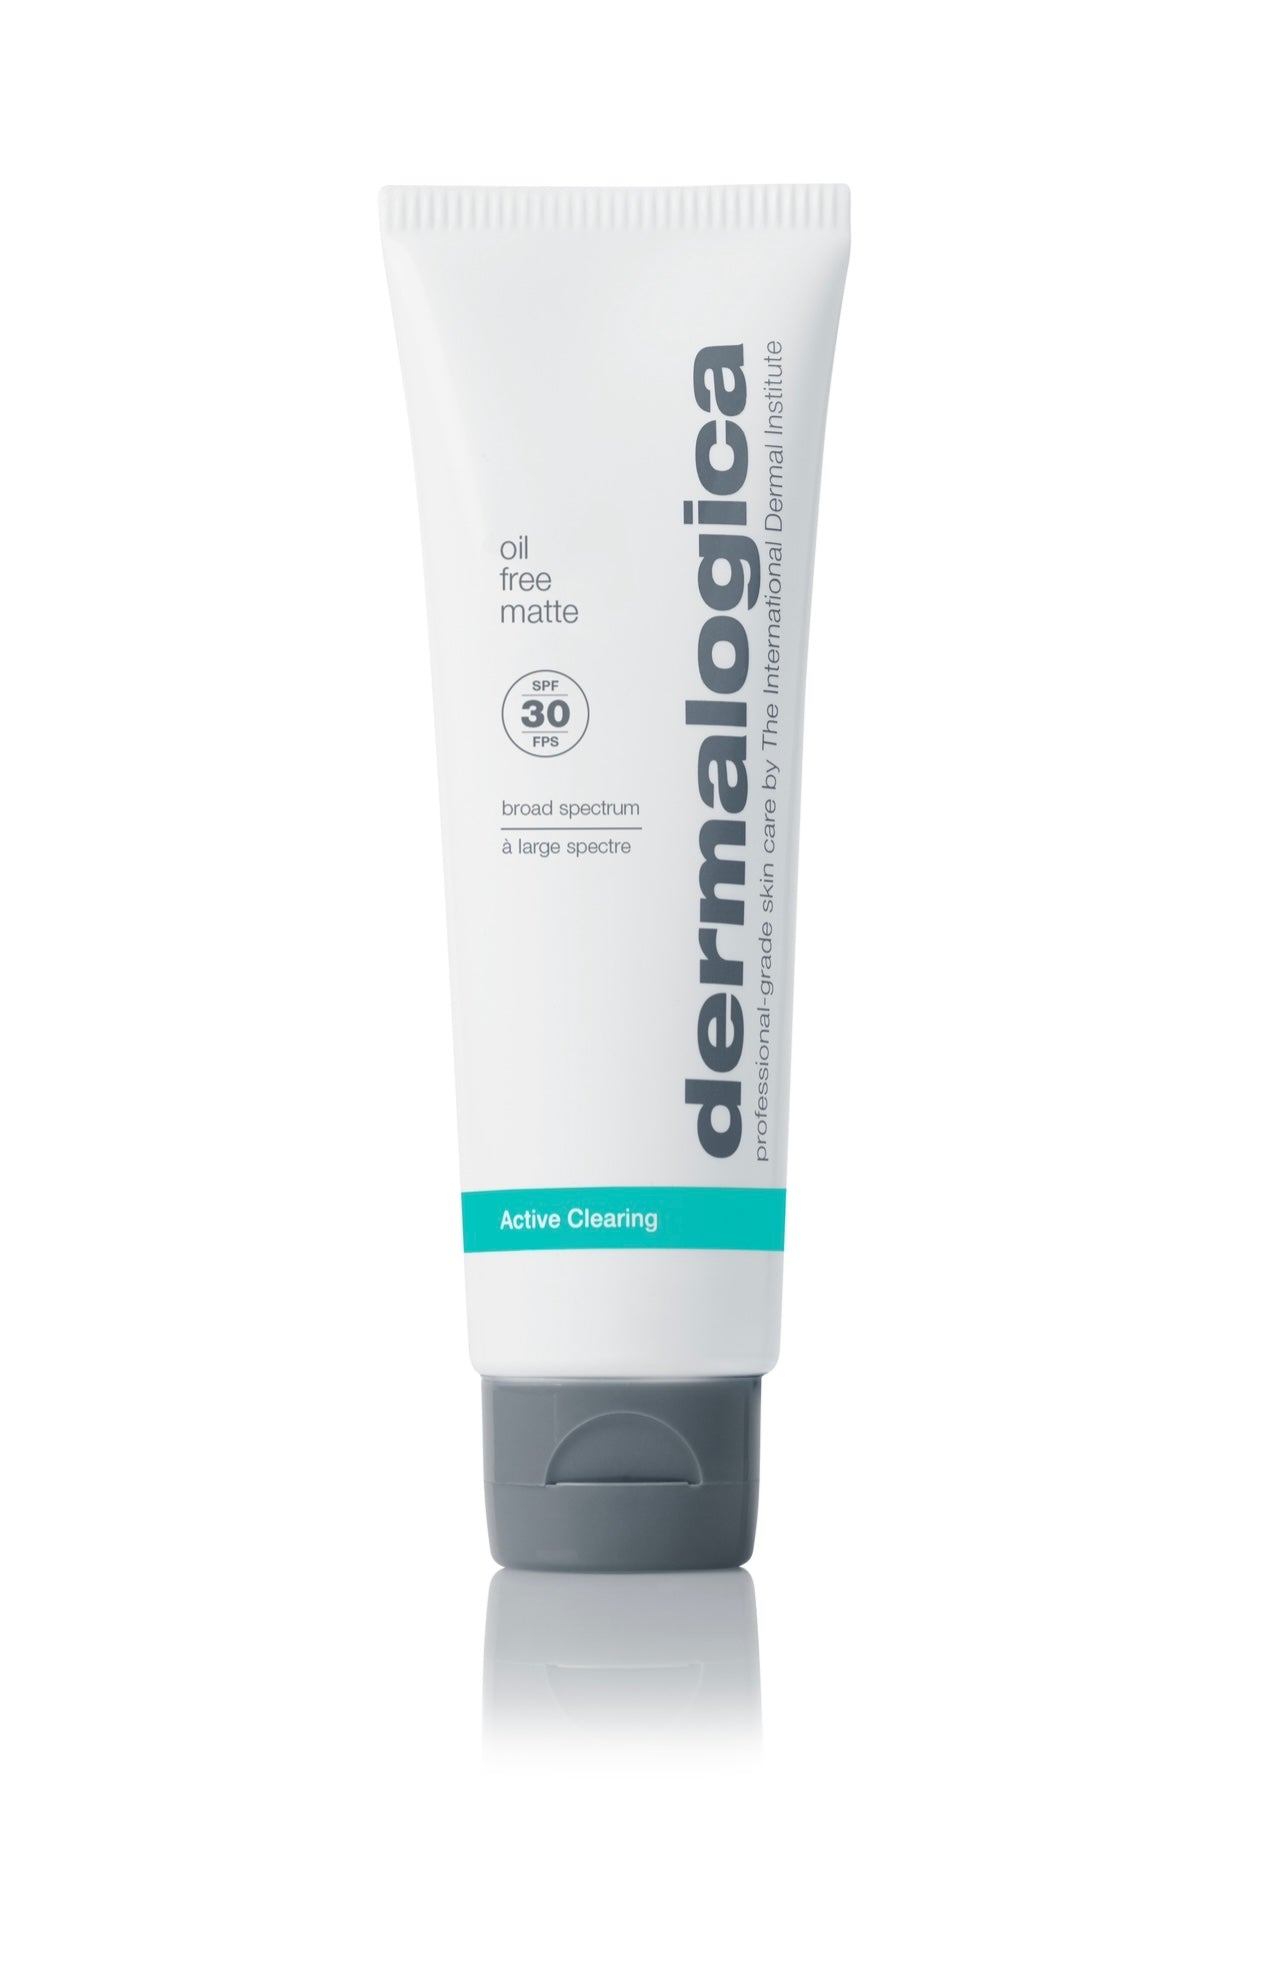 Dermalogica Active Clearing Oil Free Matte spf 30 50ml